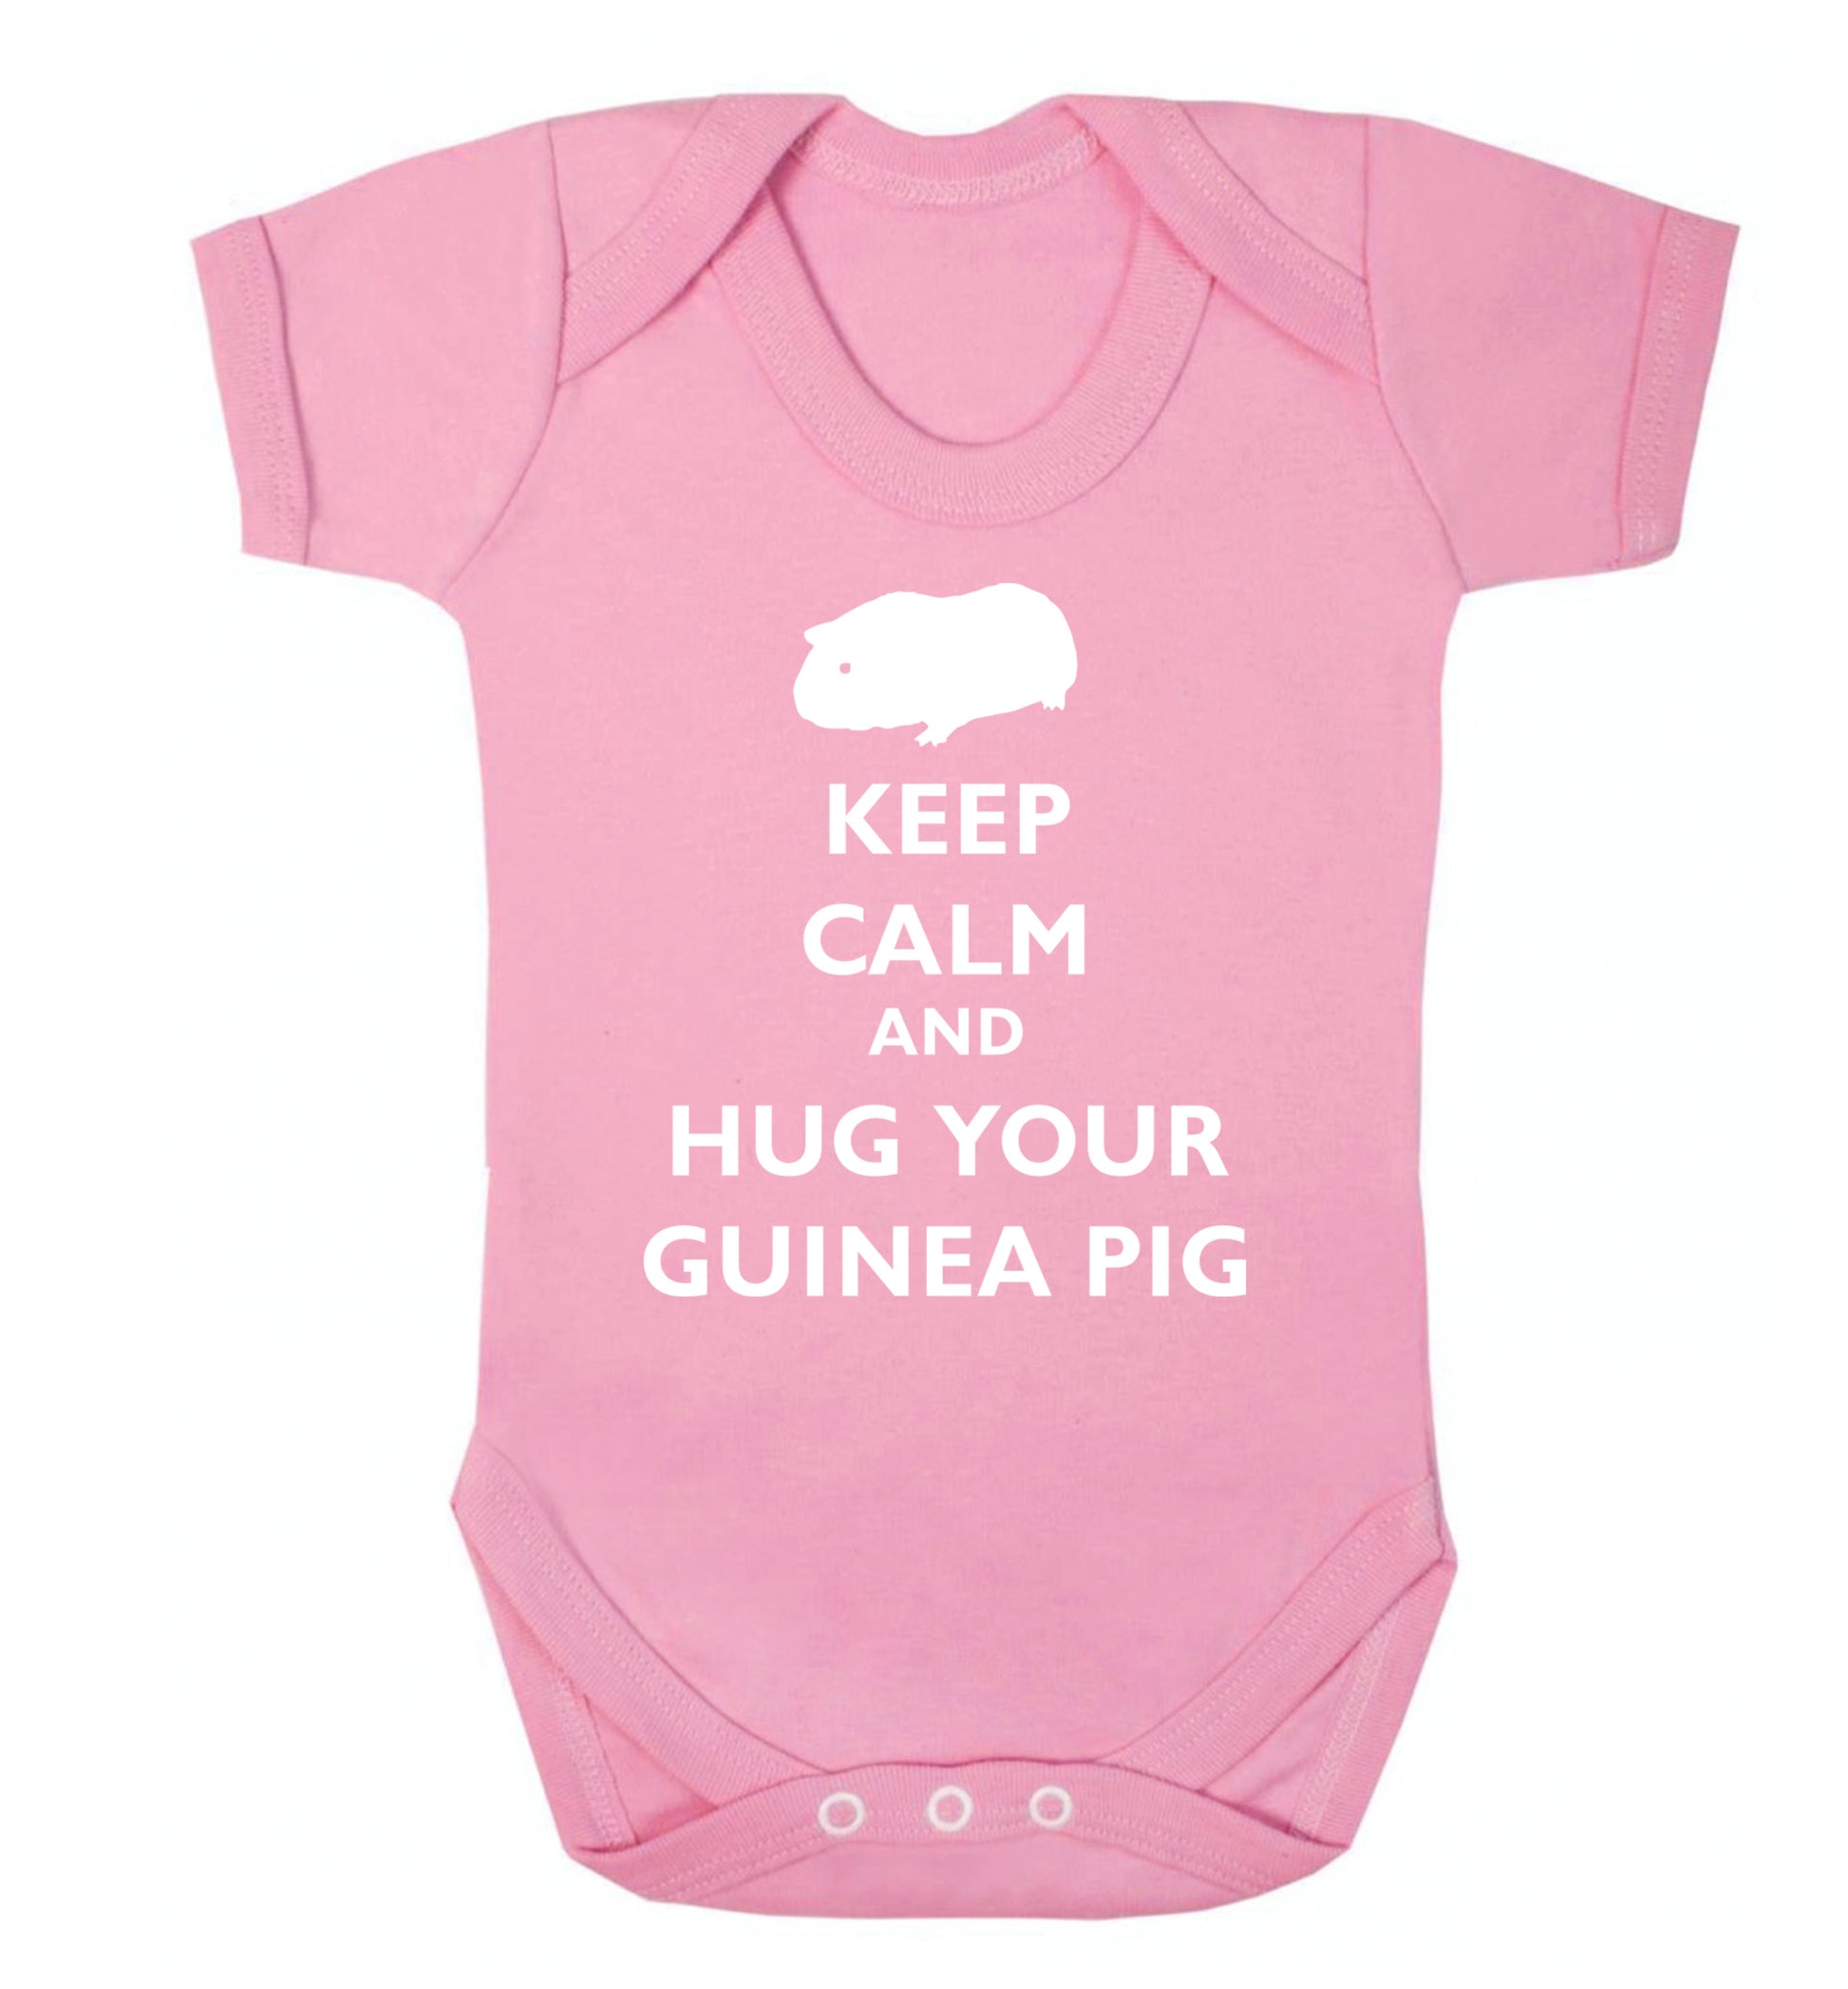 Keep calm and hug your guineapig Baby Vest pale pink 18-24 months